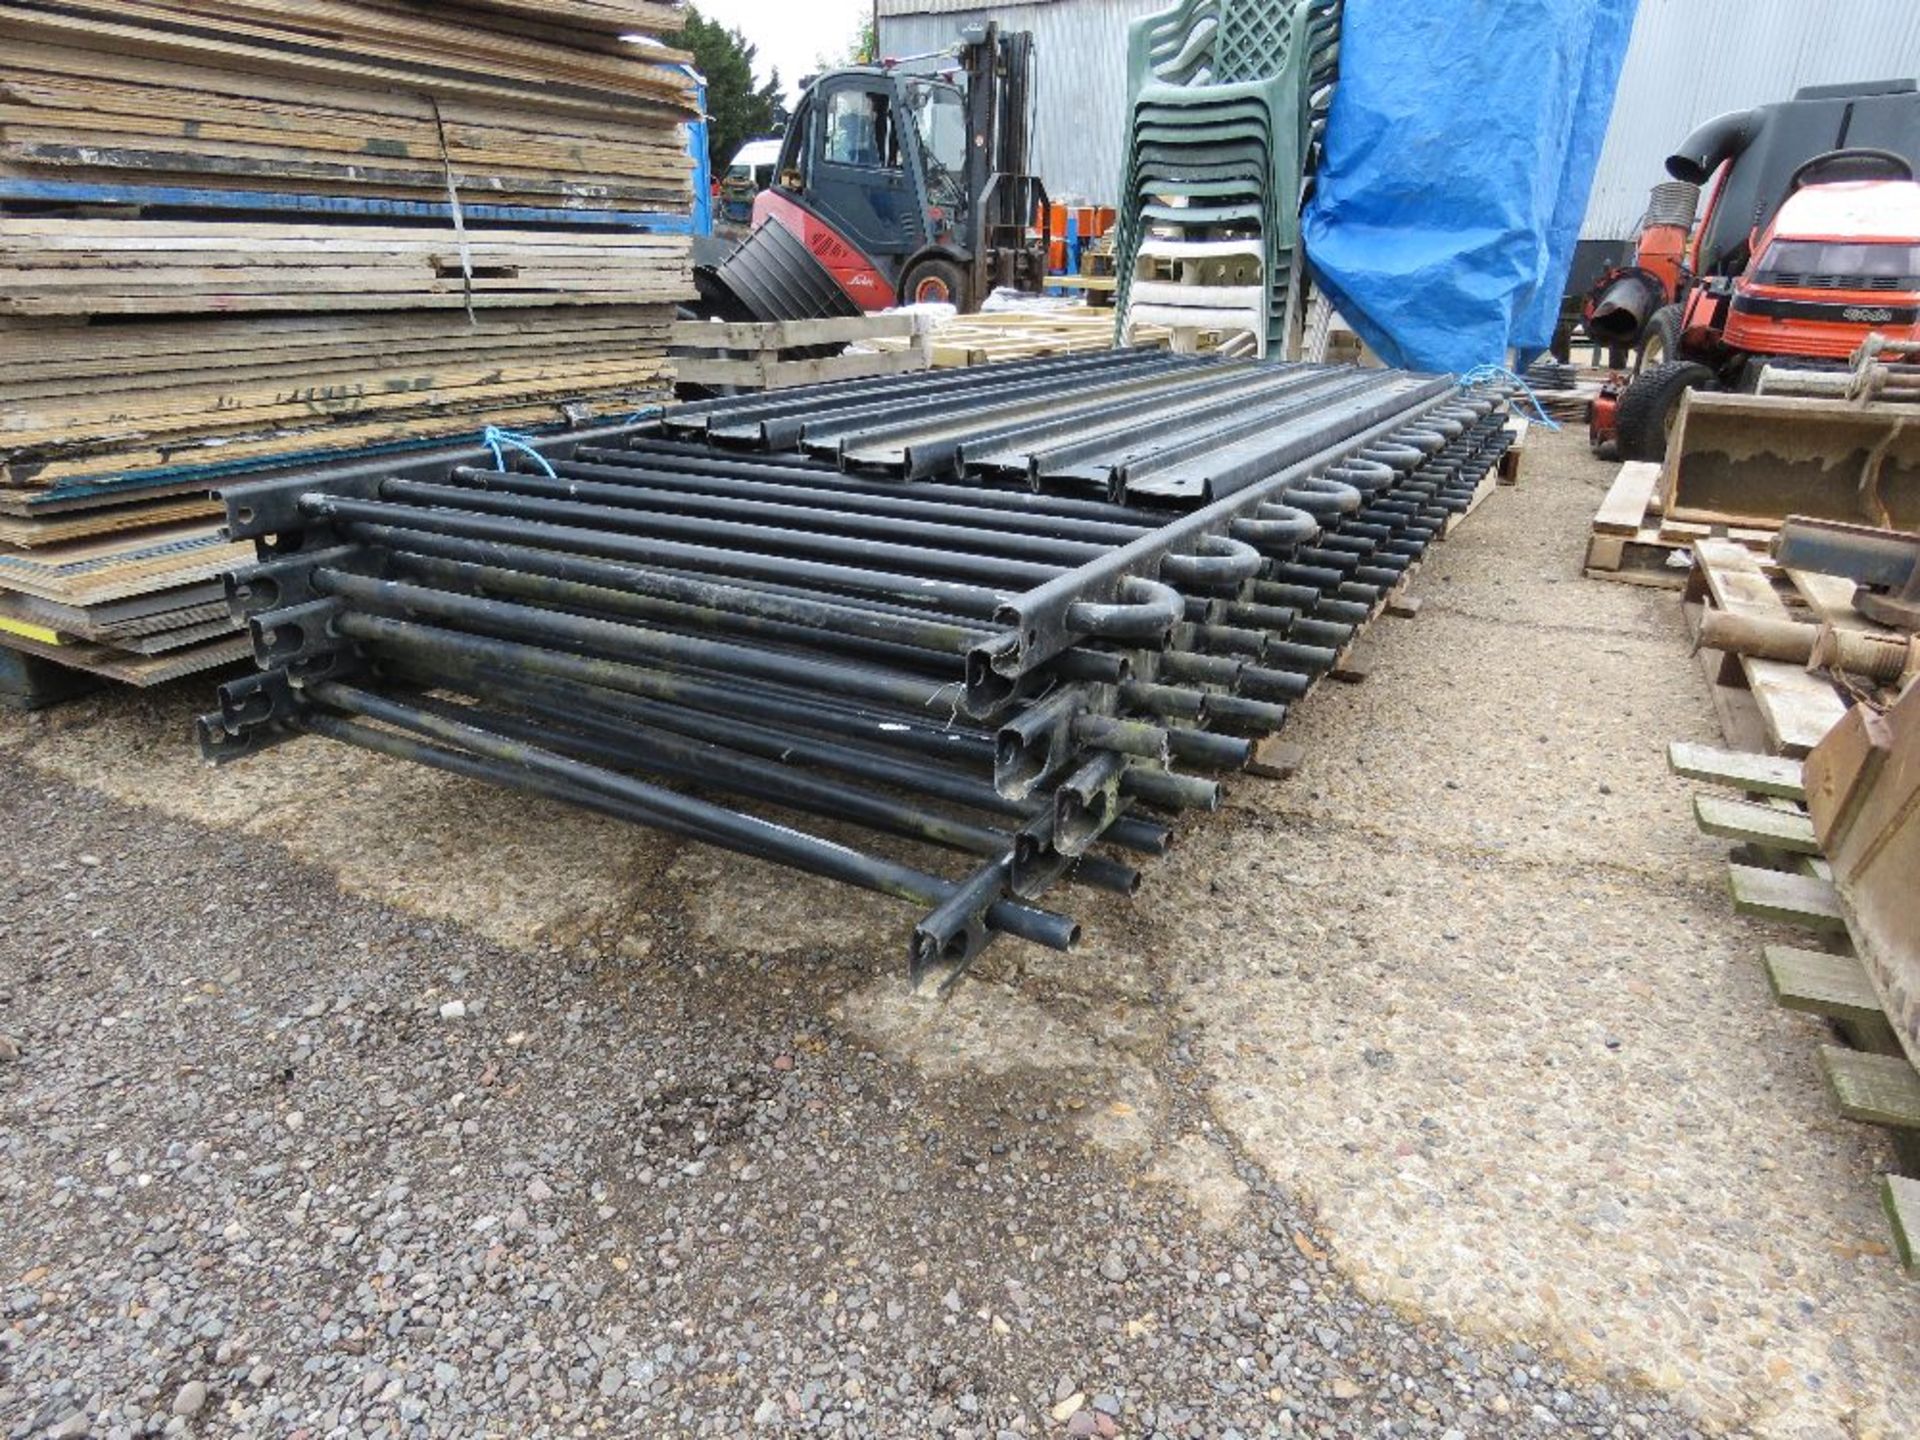 STACK OF 7 X ROUND TOPPED HEAVY DUTY METAL FENCE RAILINGS 2.88M LENGTH X 1.1M HEIGHT APPROX WITH 7 X - Image 5 of 7